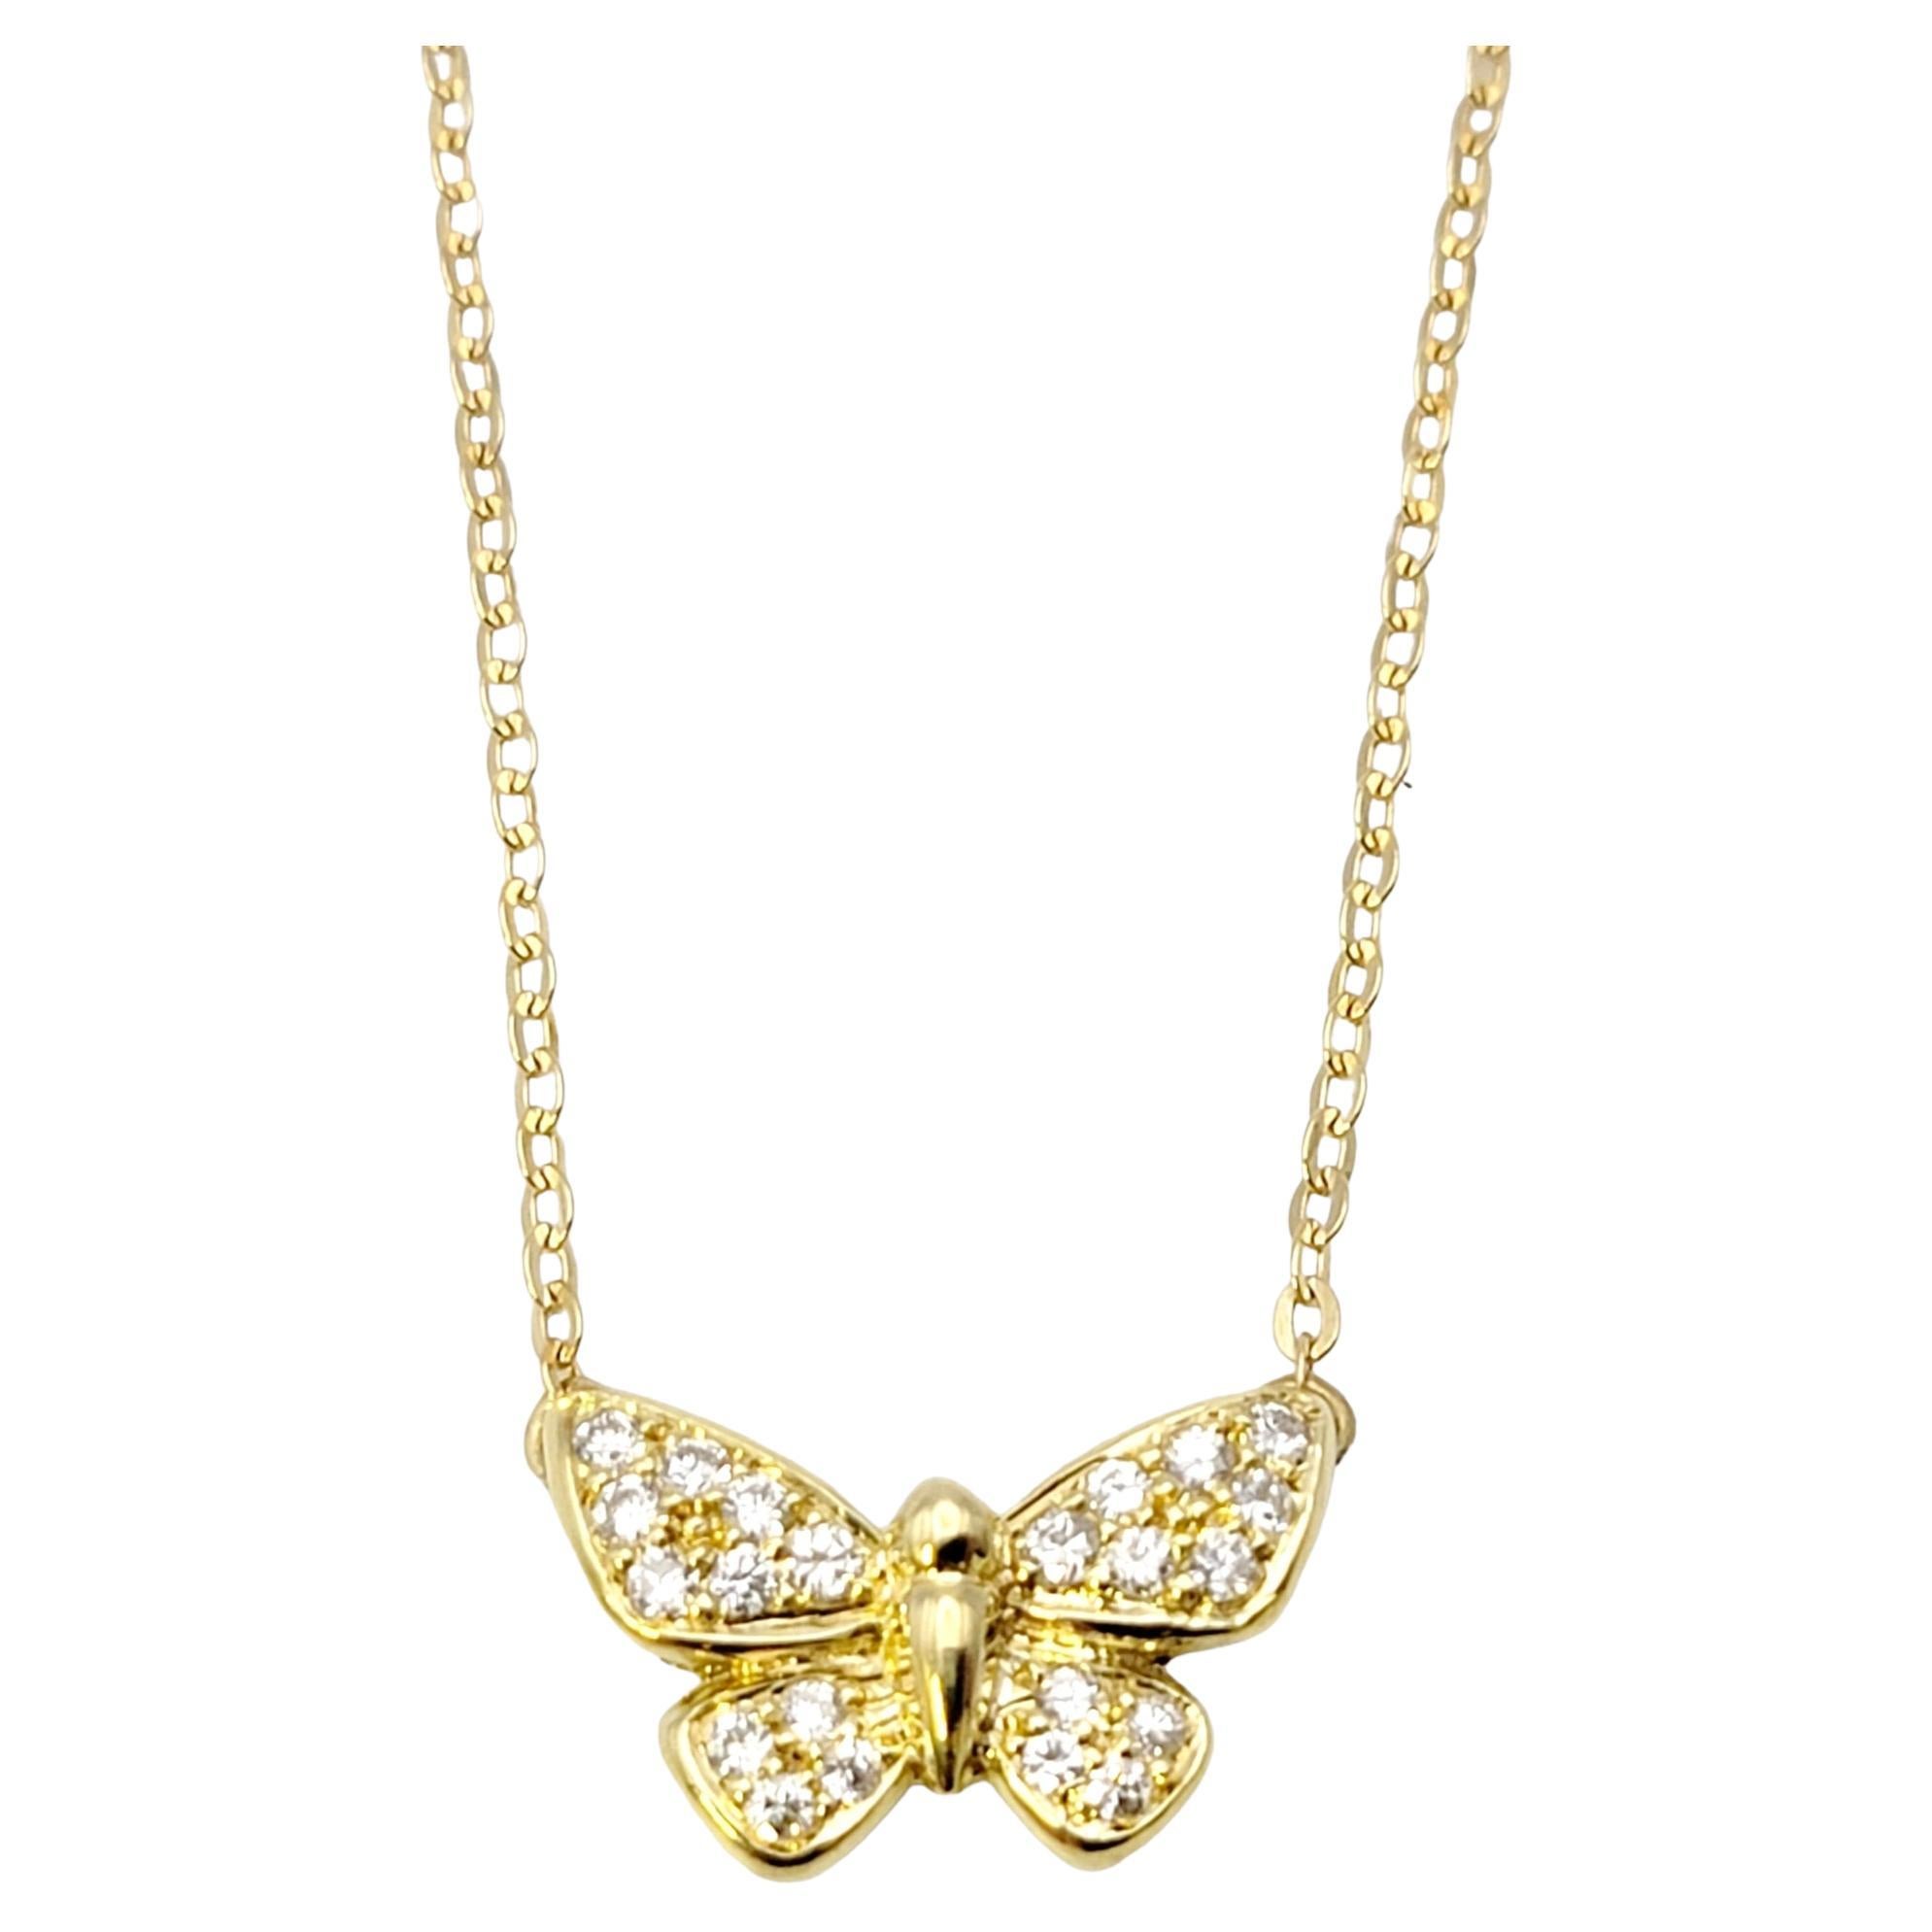 Contemporary 18 Karat Yellow Gold Pave Diamond Butterfly Pendant Necklace For Sale